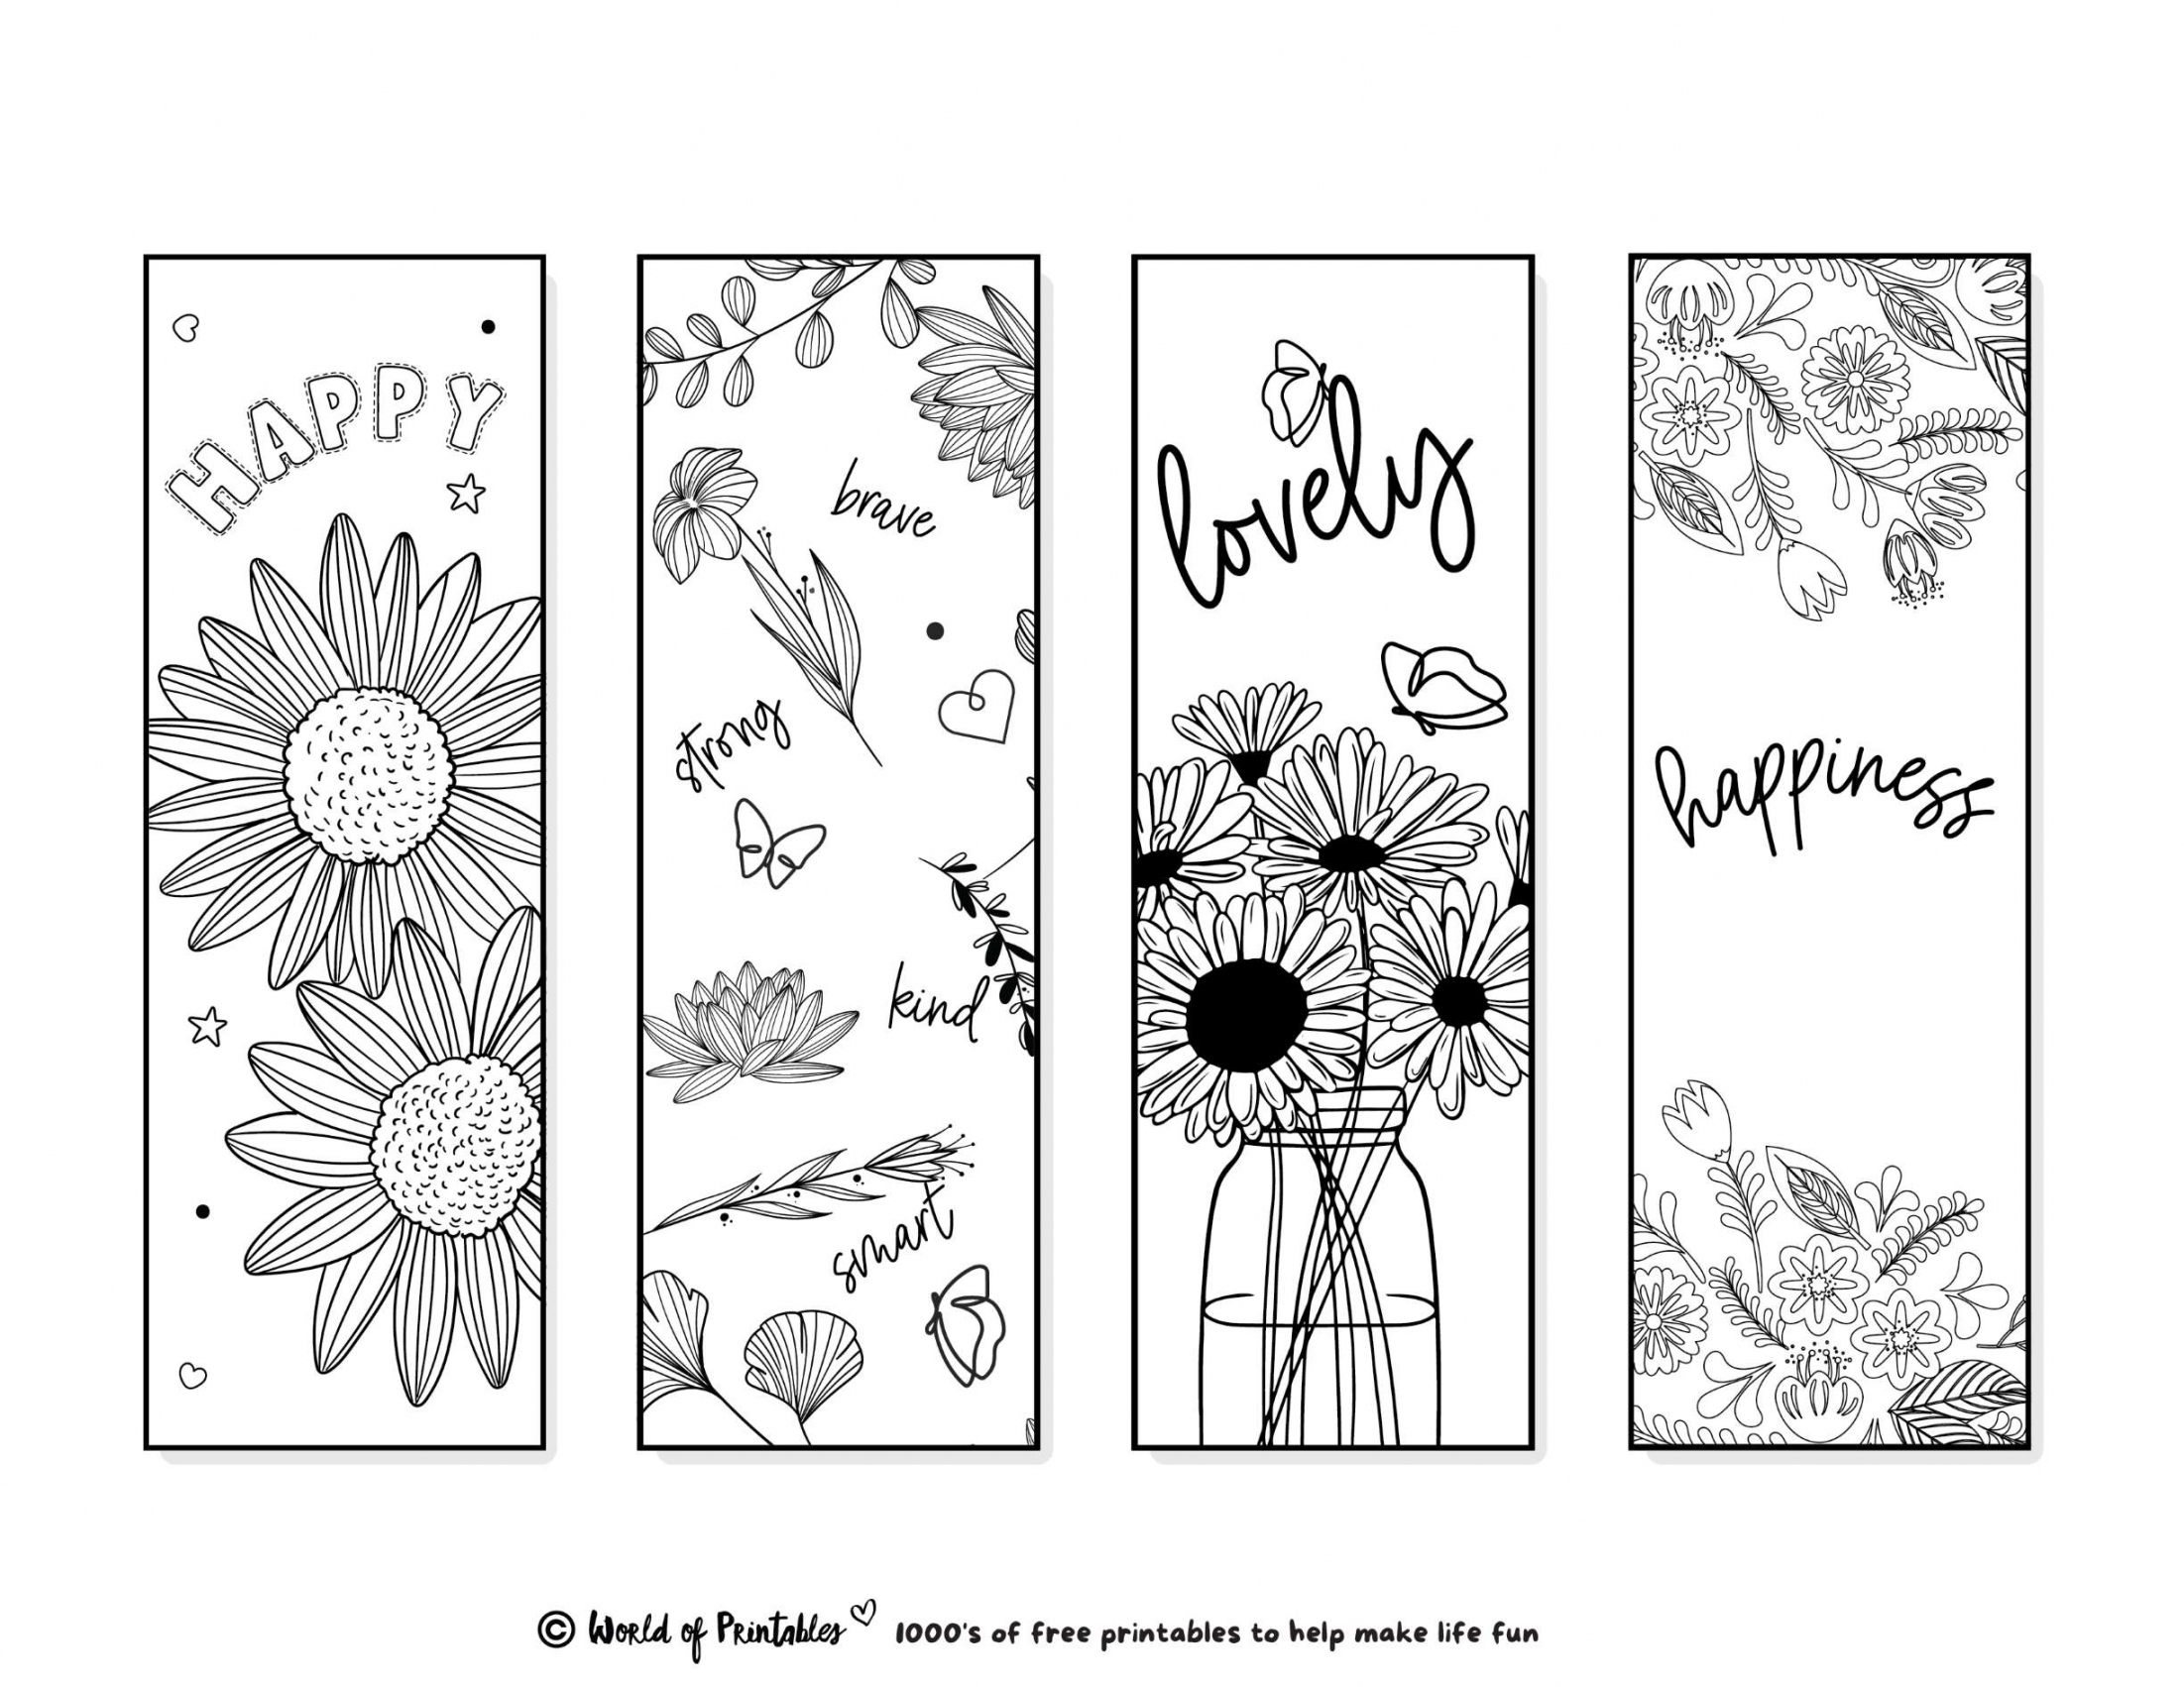 Cute Free Printable Bookmarks To Color - Printable - Printable Bookmarks To Color   For Adults & Kids - World of